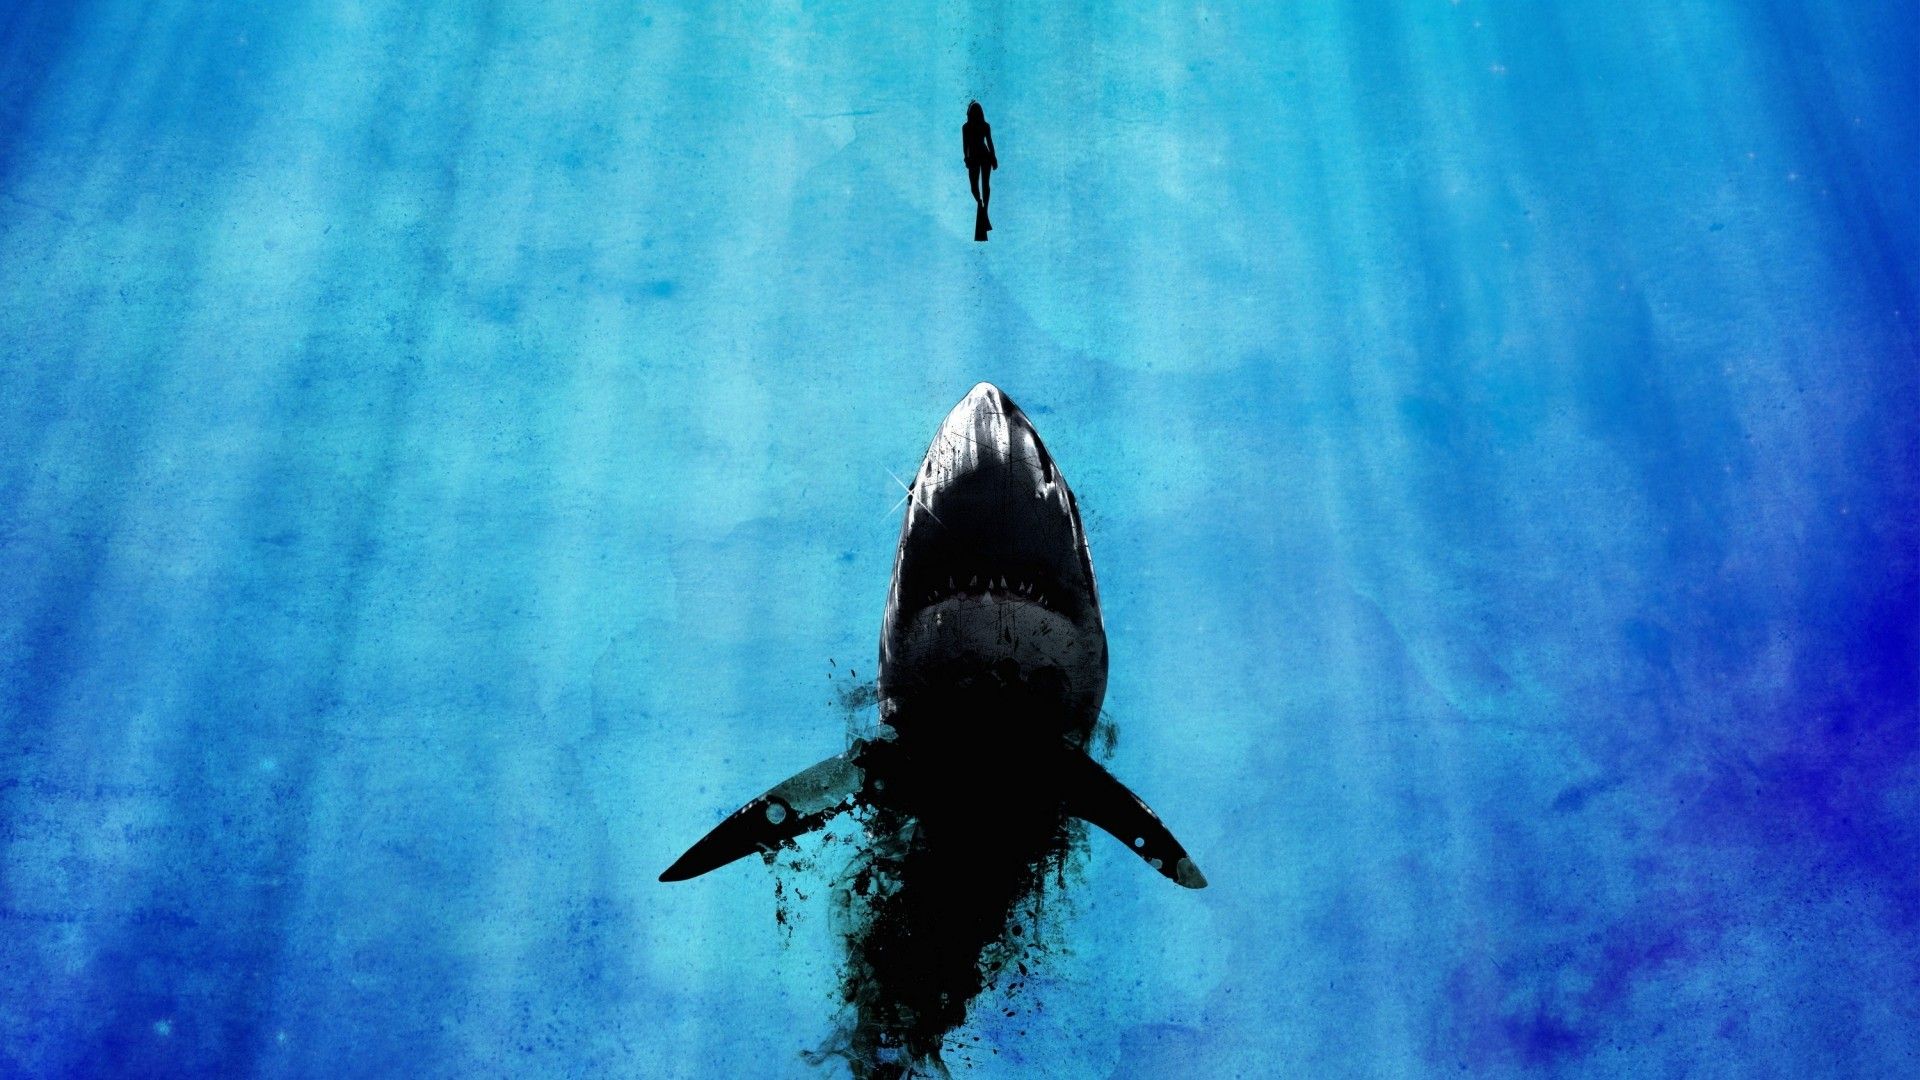 White Shark desktop wallpaper - Very scary - also seen in movies